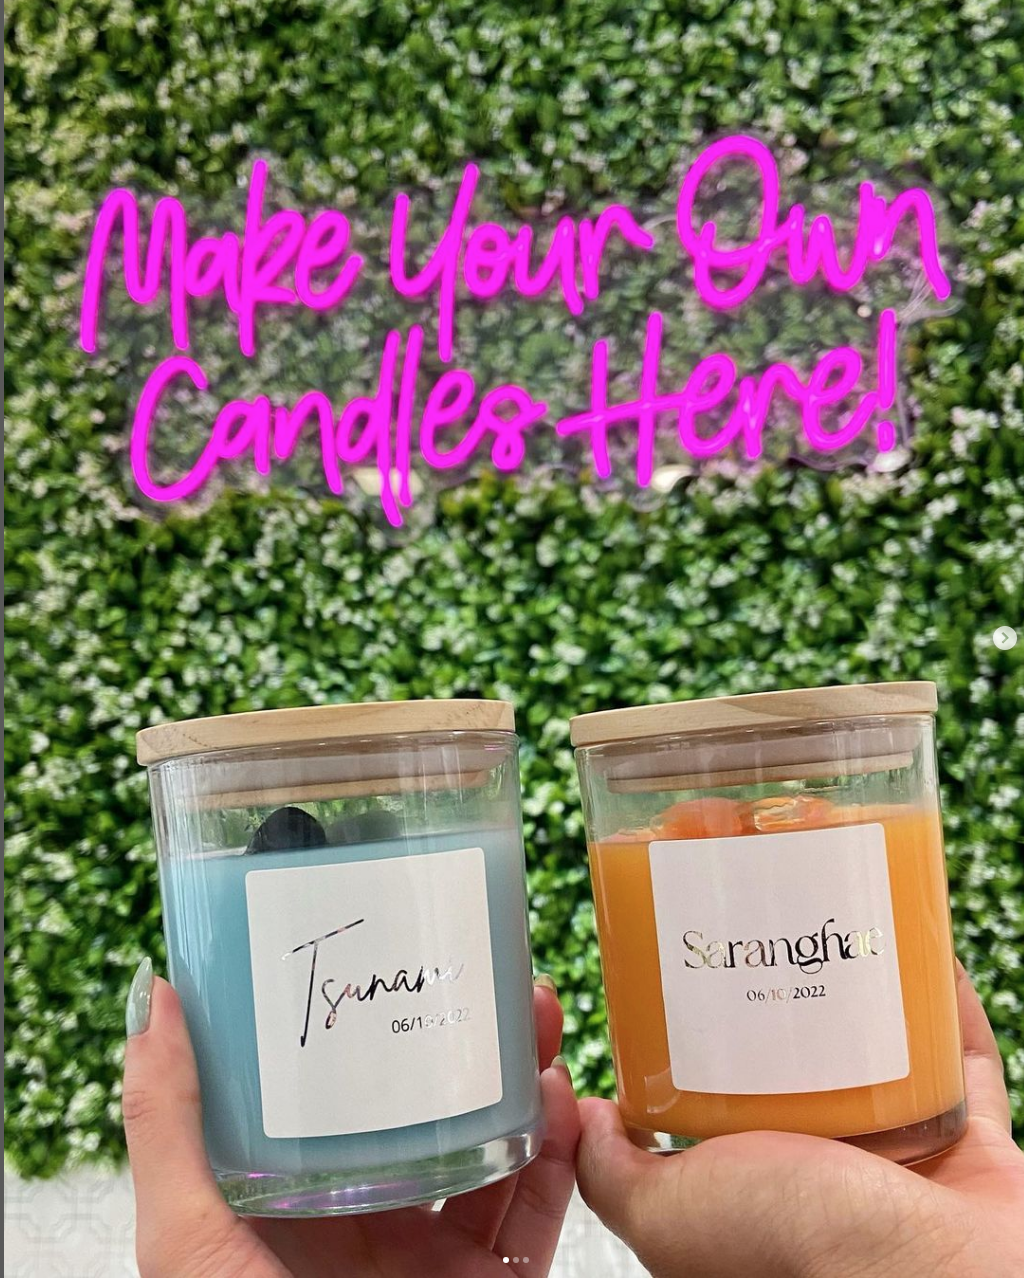 Two custom candles held below a pink neon sign that states: Make Your Own Candles Here